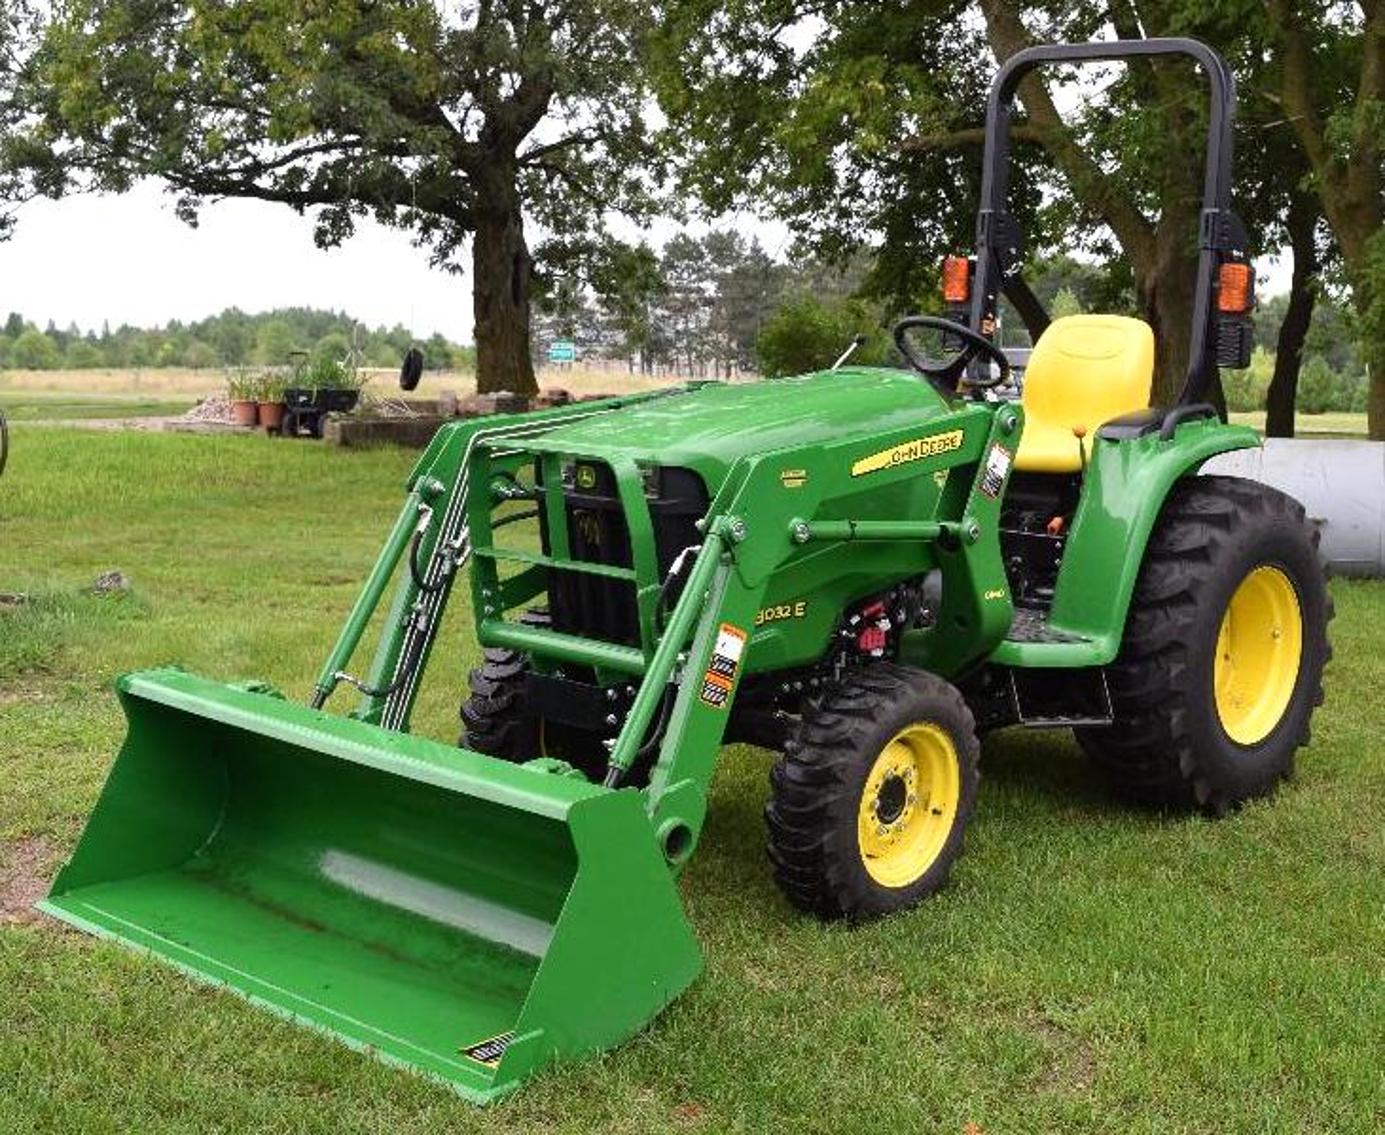 JD 3032E Tractor With Loader, JD 2320 HST With Mower & Loader, Jeep CJ7